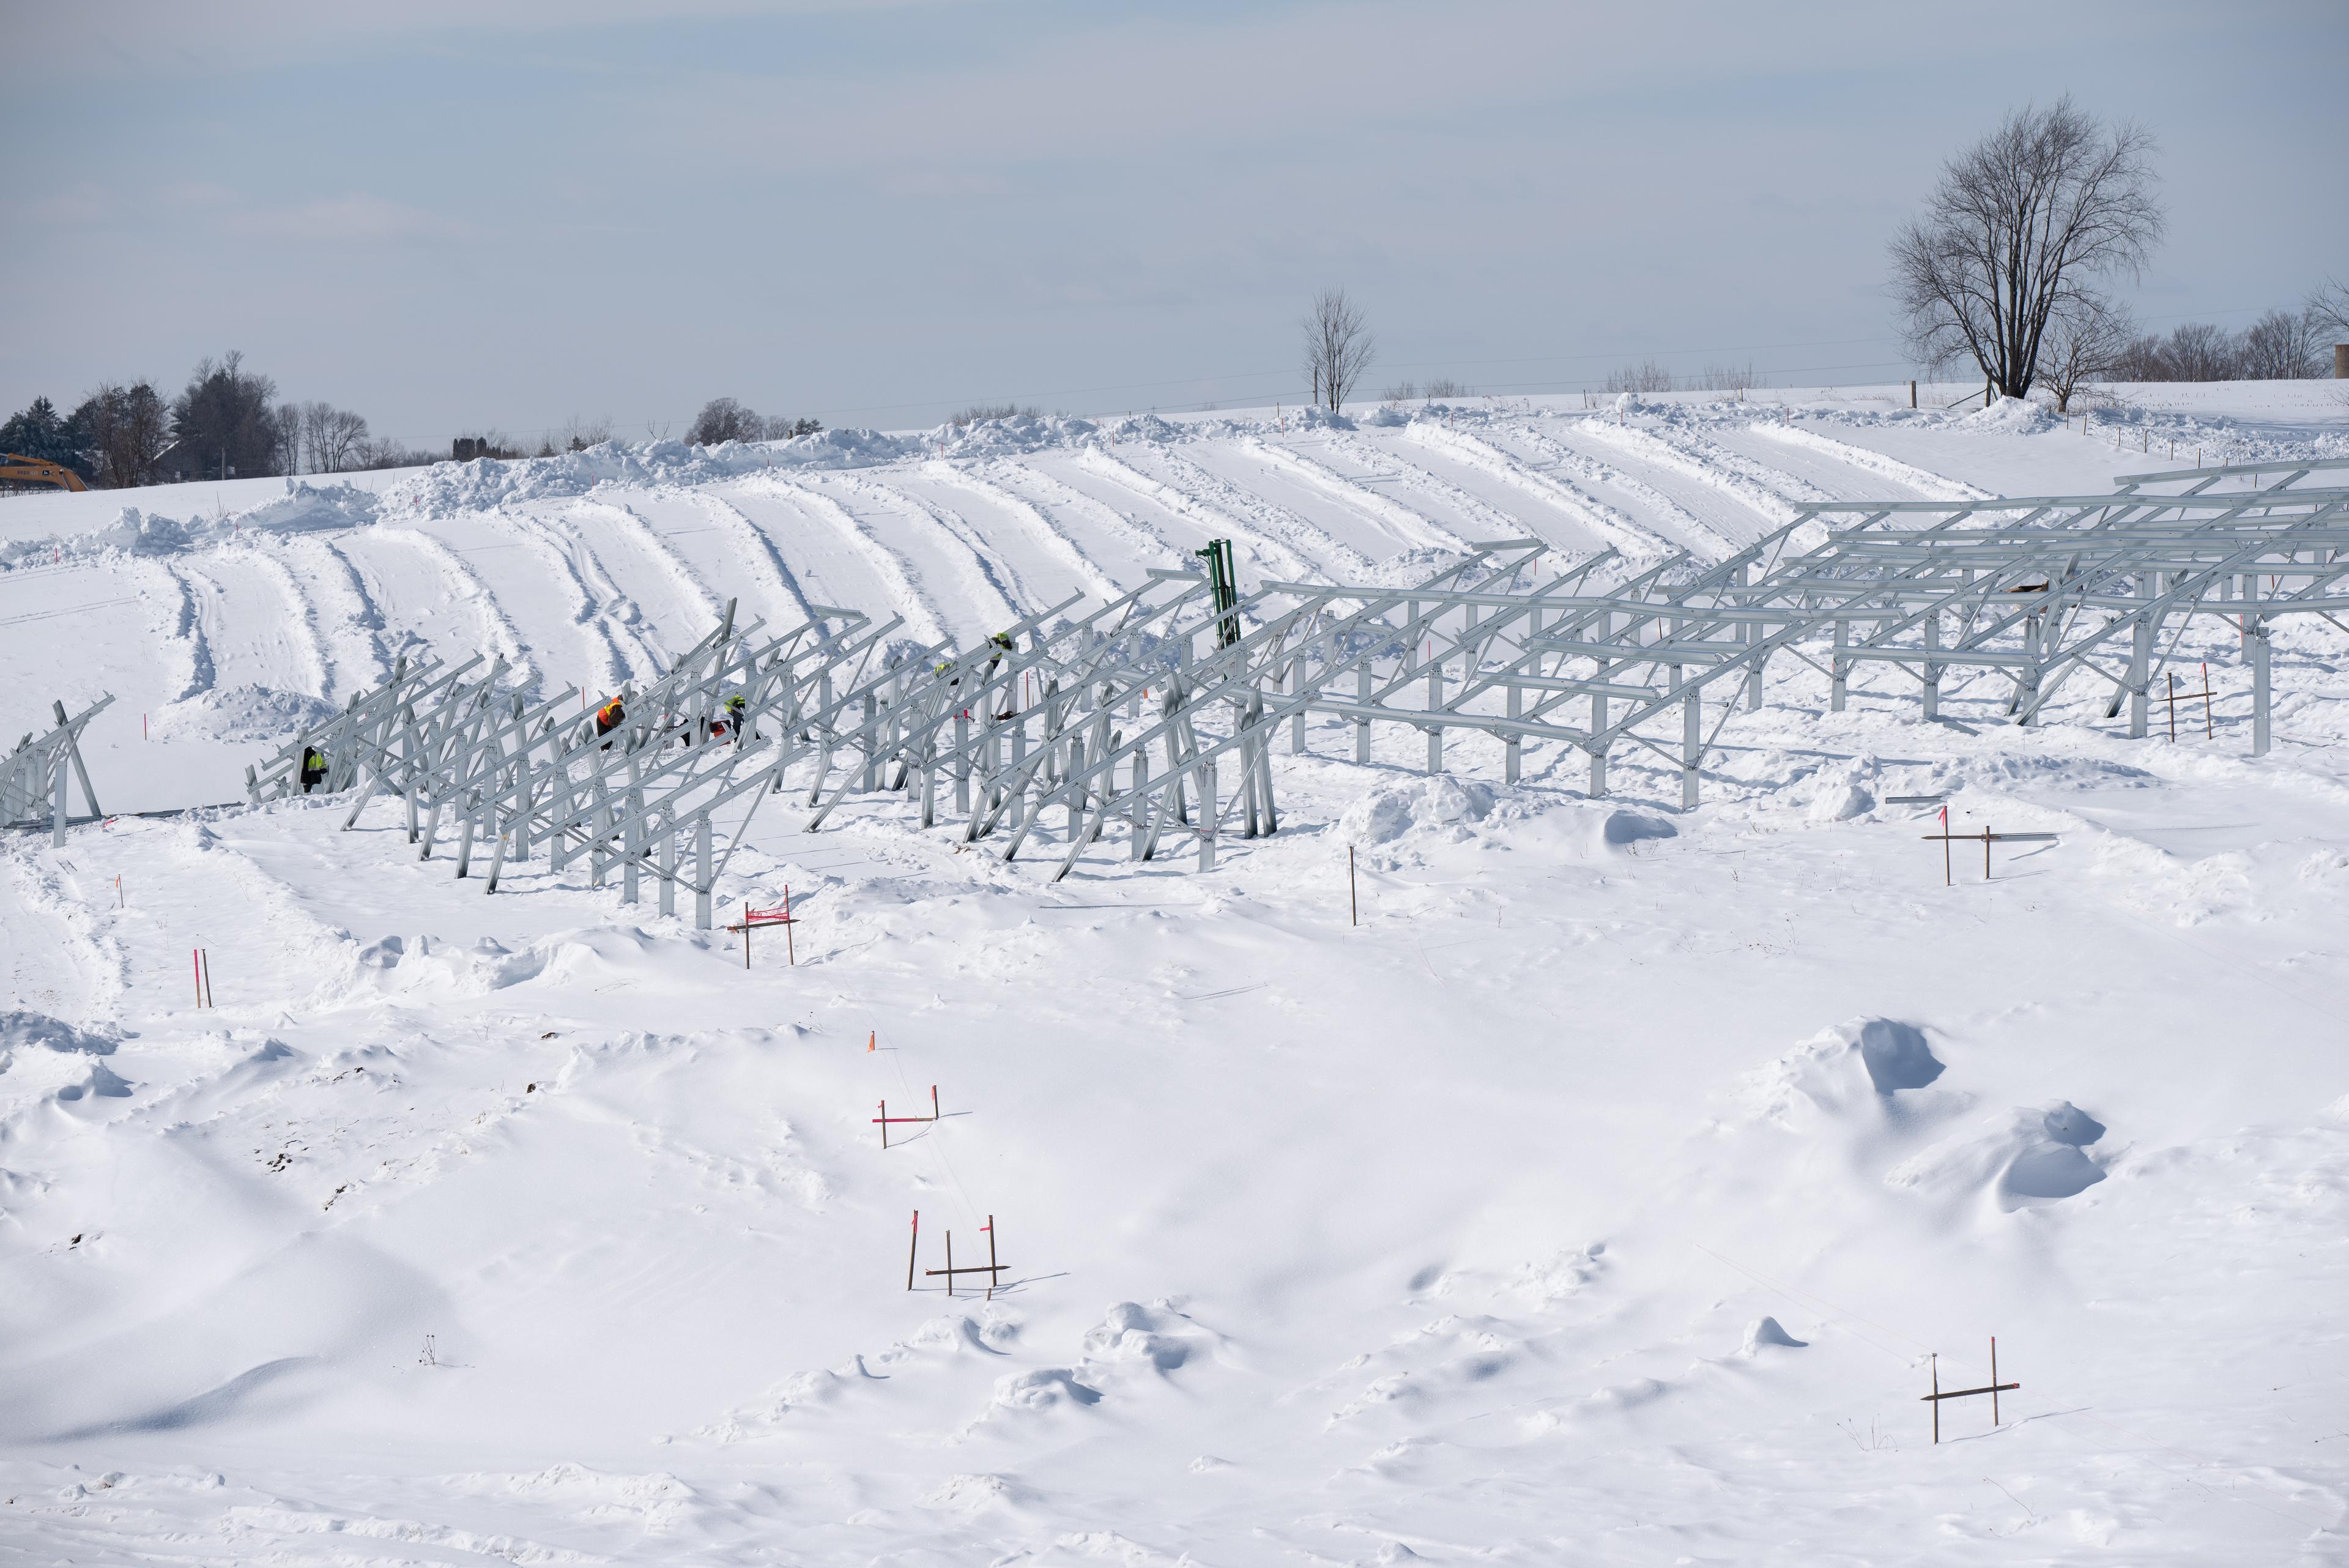 Workers installing the supports for solar panels in a snow-covered field.